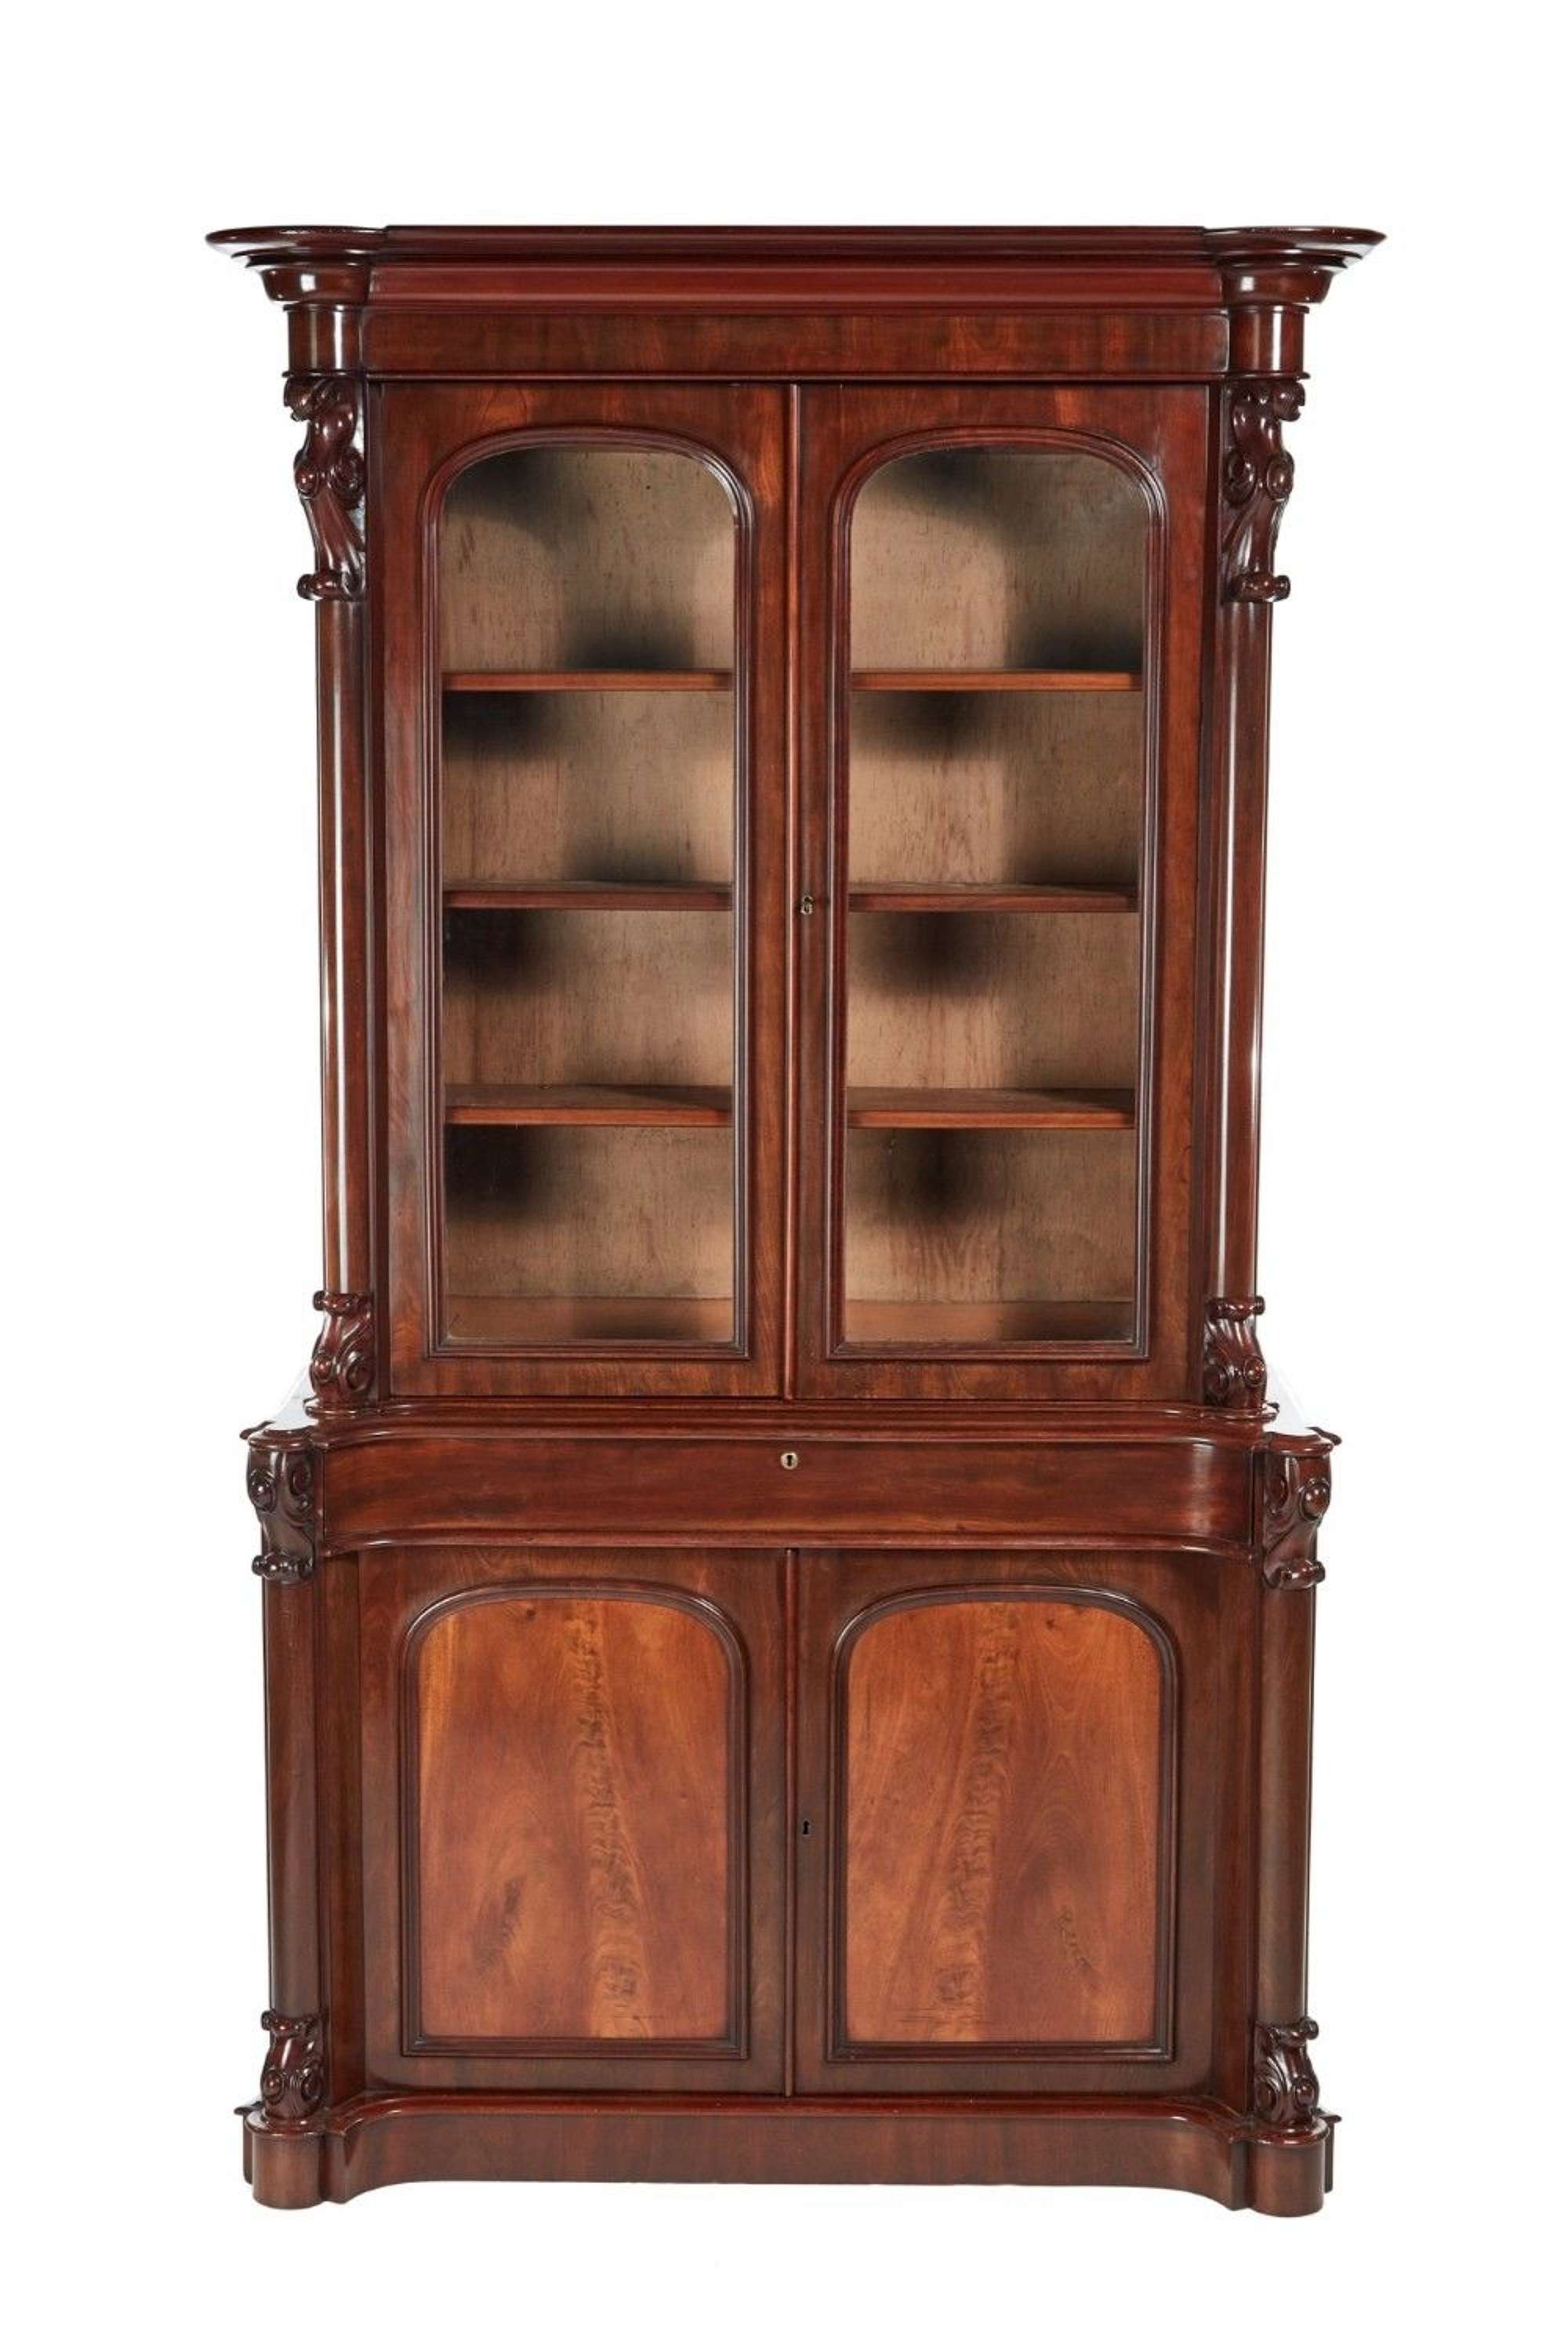 Superior Quality Victorian Carved Mahogany Antique Bookcase